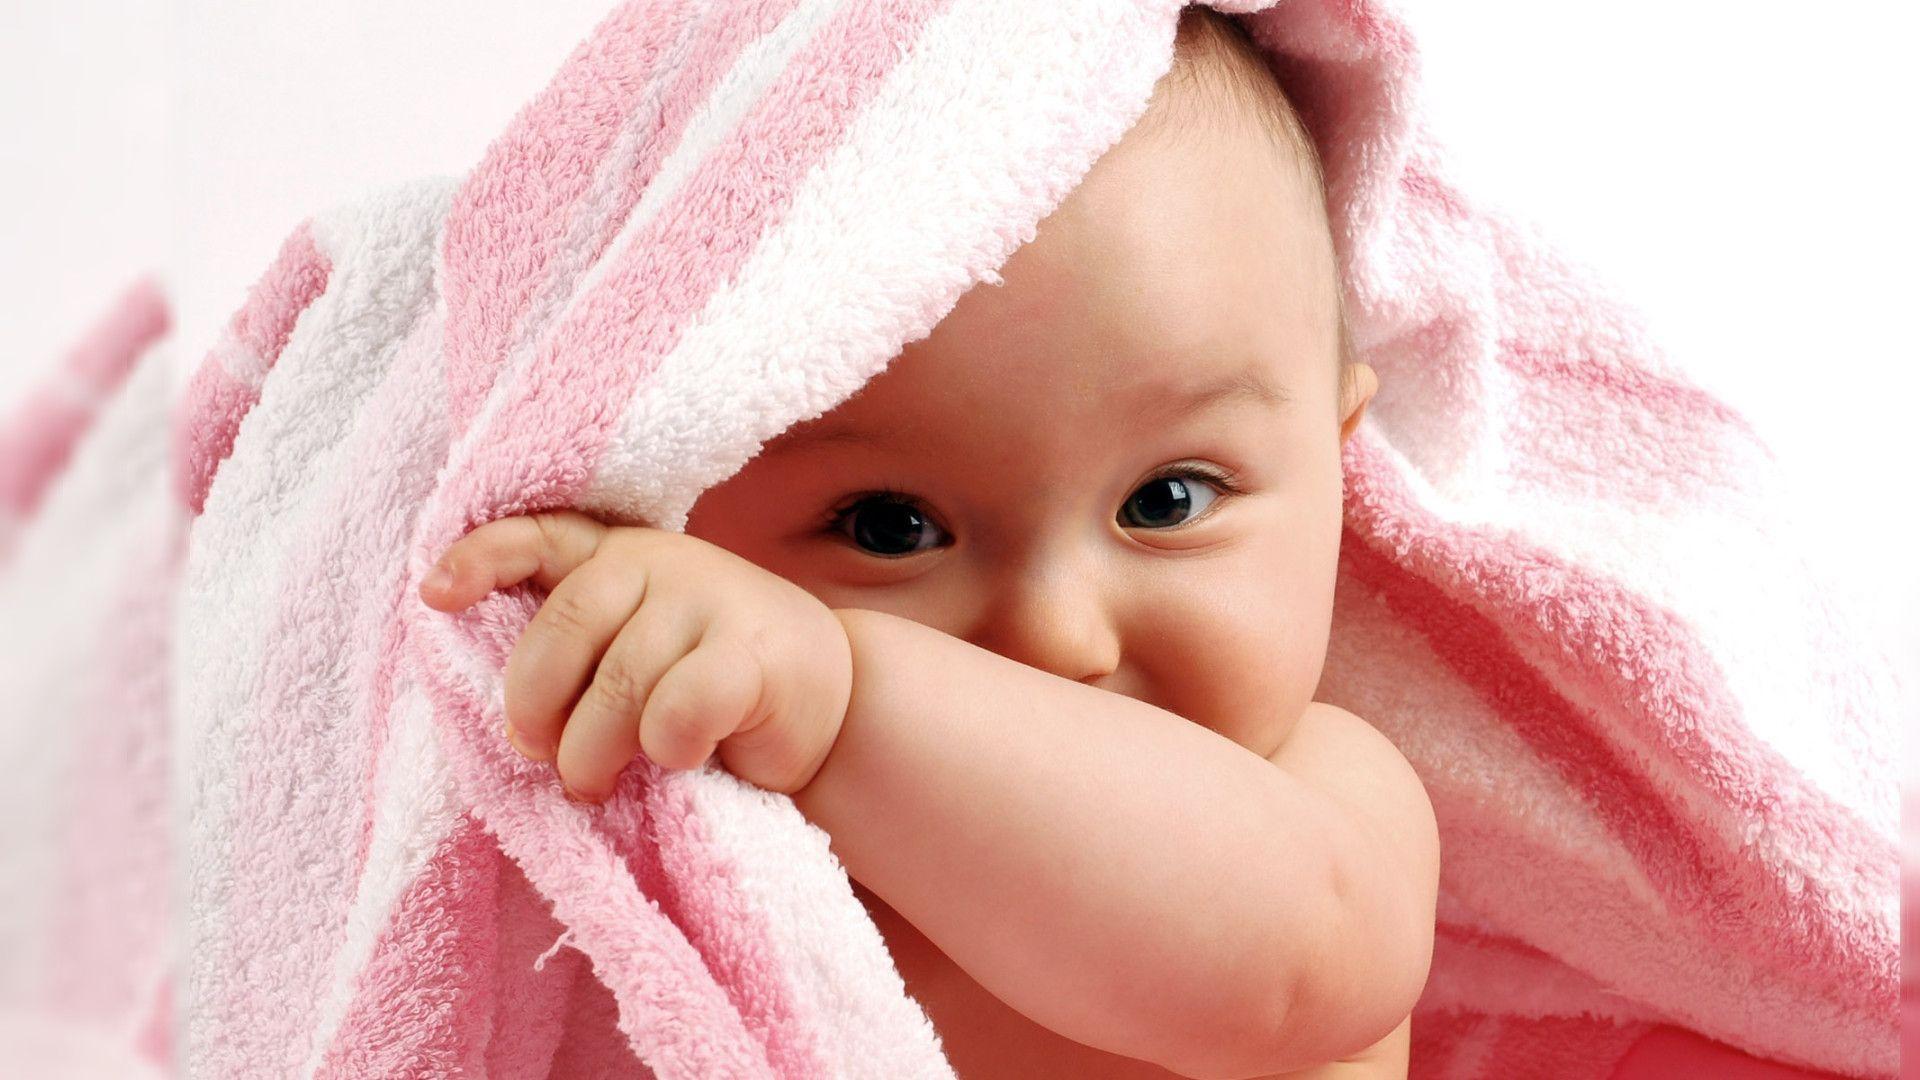 Cute Baby Wallpaper For Desktop 5. Best Web For Quotes, Facts